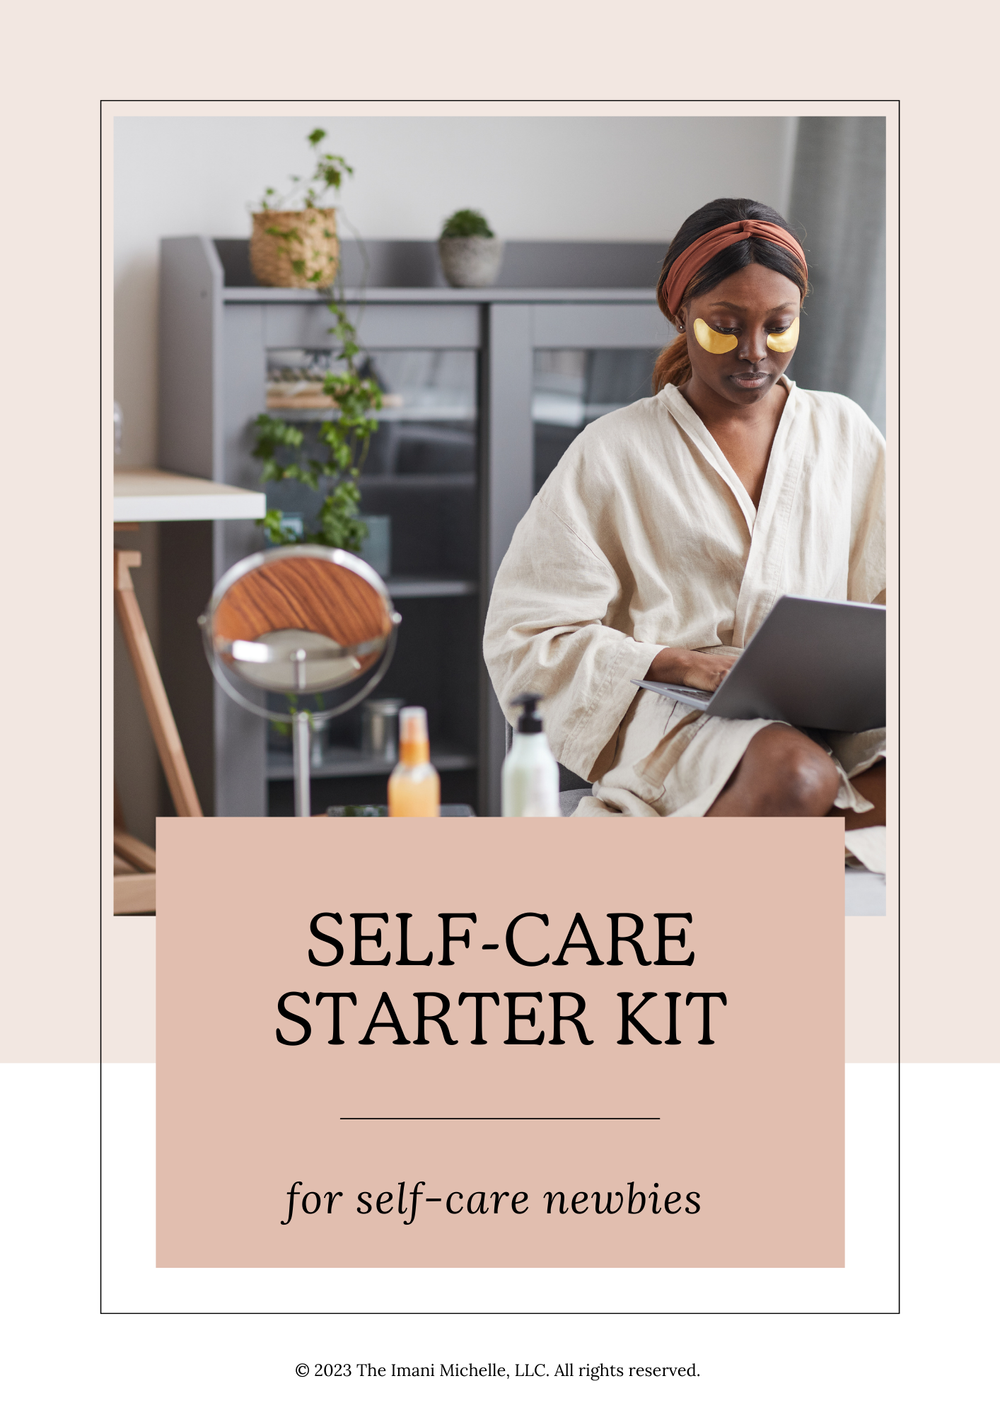 At-Home Self-Care Kit